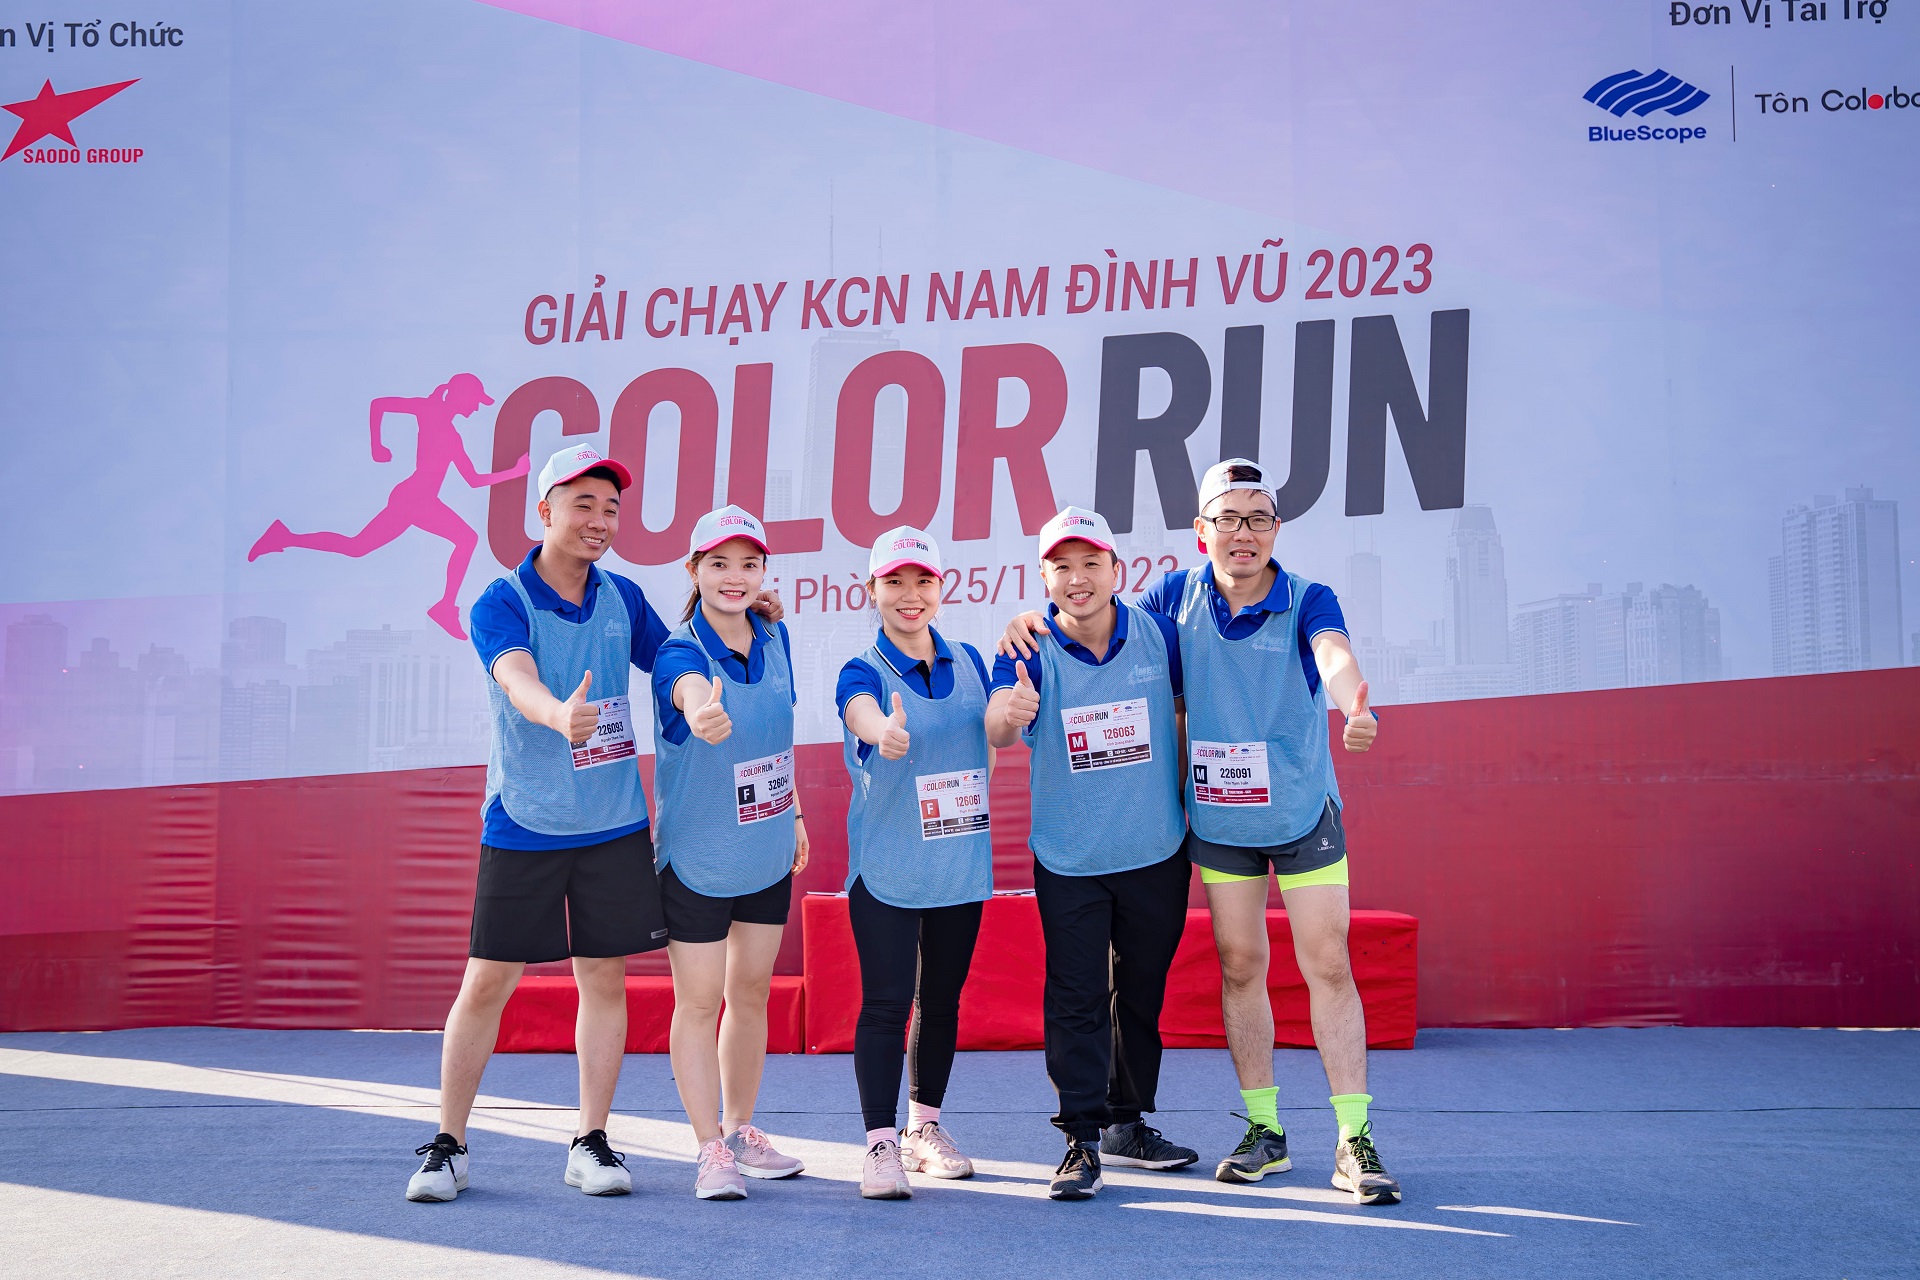 Amecc participates in the Color Run 2023 event - Exploring capabilities and networking at Nam Dinh Vu Industrial Park